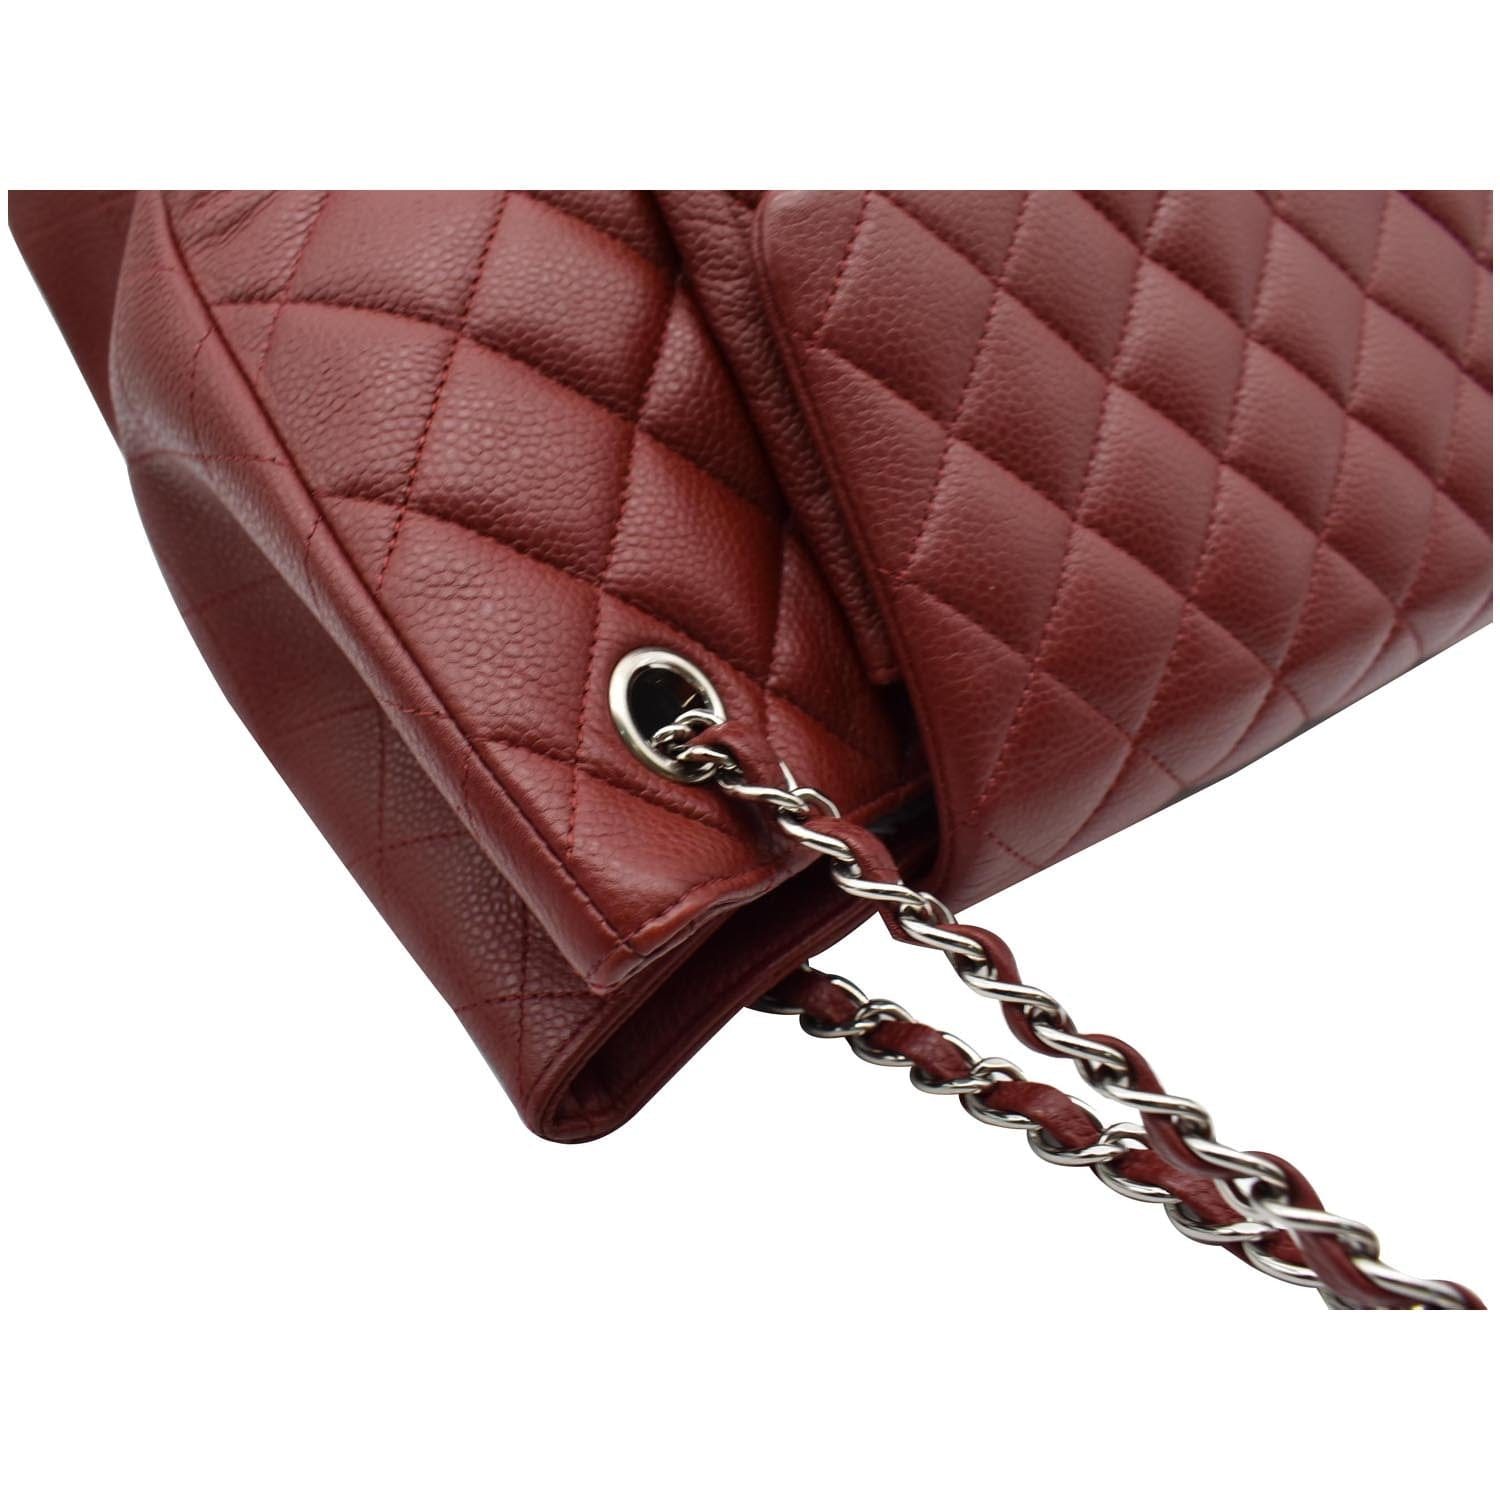 Chanel Red Caviar Flap Wallet